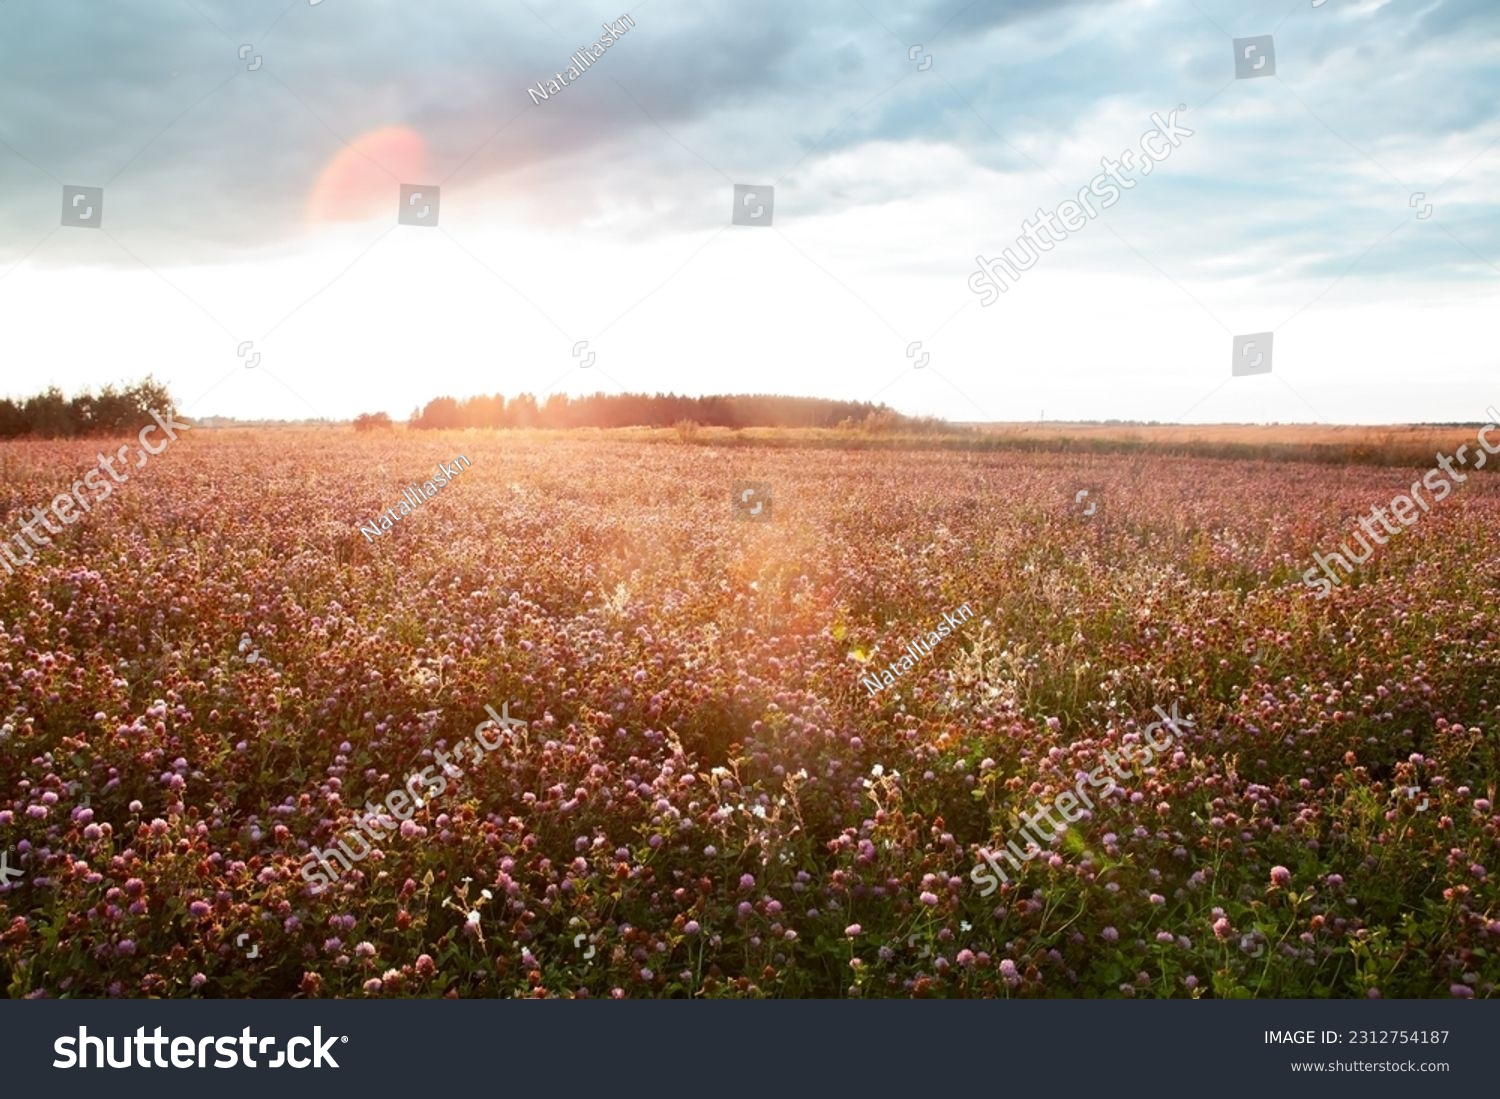 Summer landscape with a field of blooming pink clover, in the natural soft sunset sunlight. Field of red clover Trifolium pratense. Forage crop for livestock grazing. #2312754187